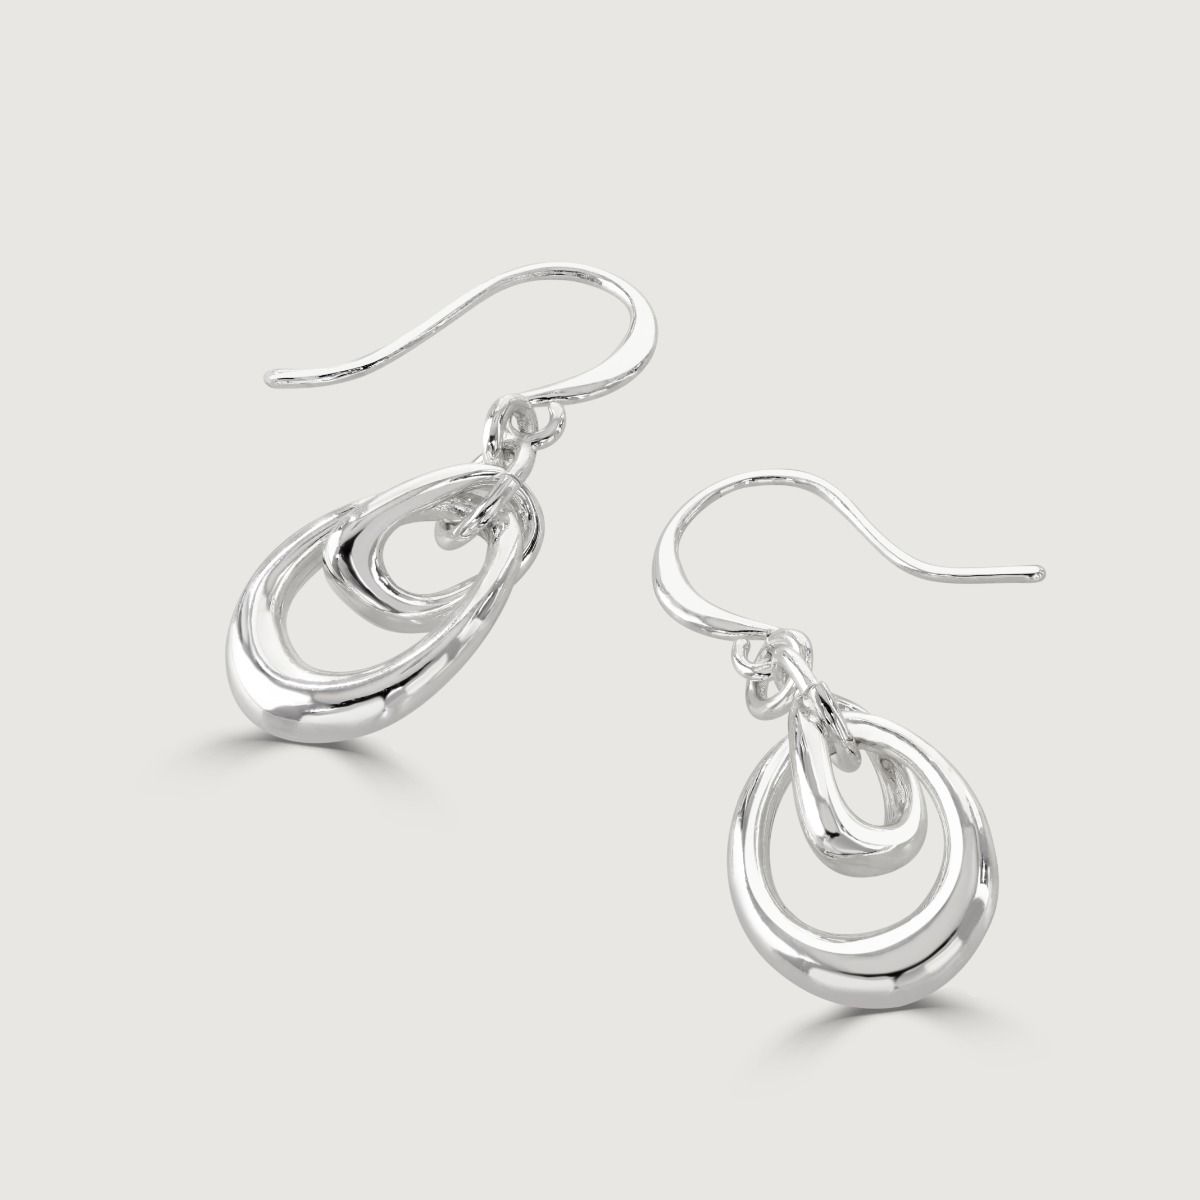 The Silver Organic Double Hoop Drop Earrings are exquisite pieces of jewelry that showcase elegance and style. With intertwining hoops and a lustrous silver shine, these earrings make a statement while symbolizing unity and connection.